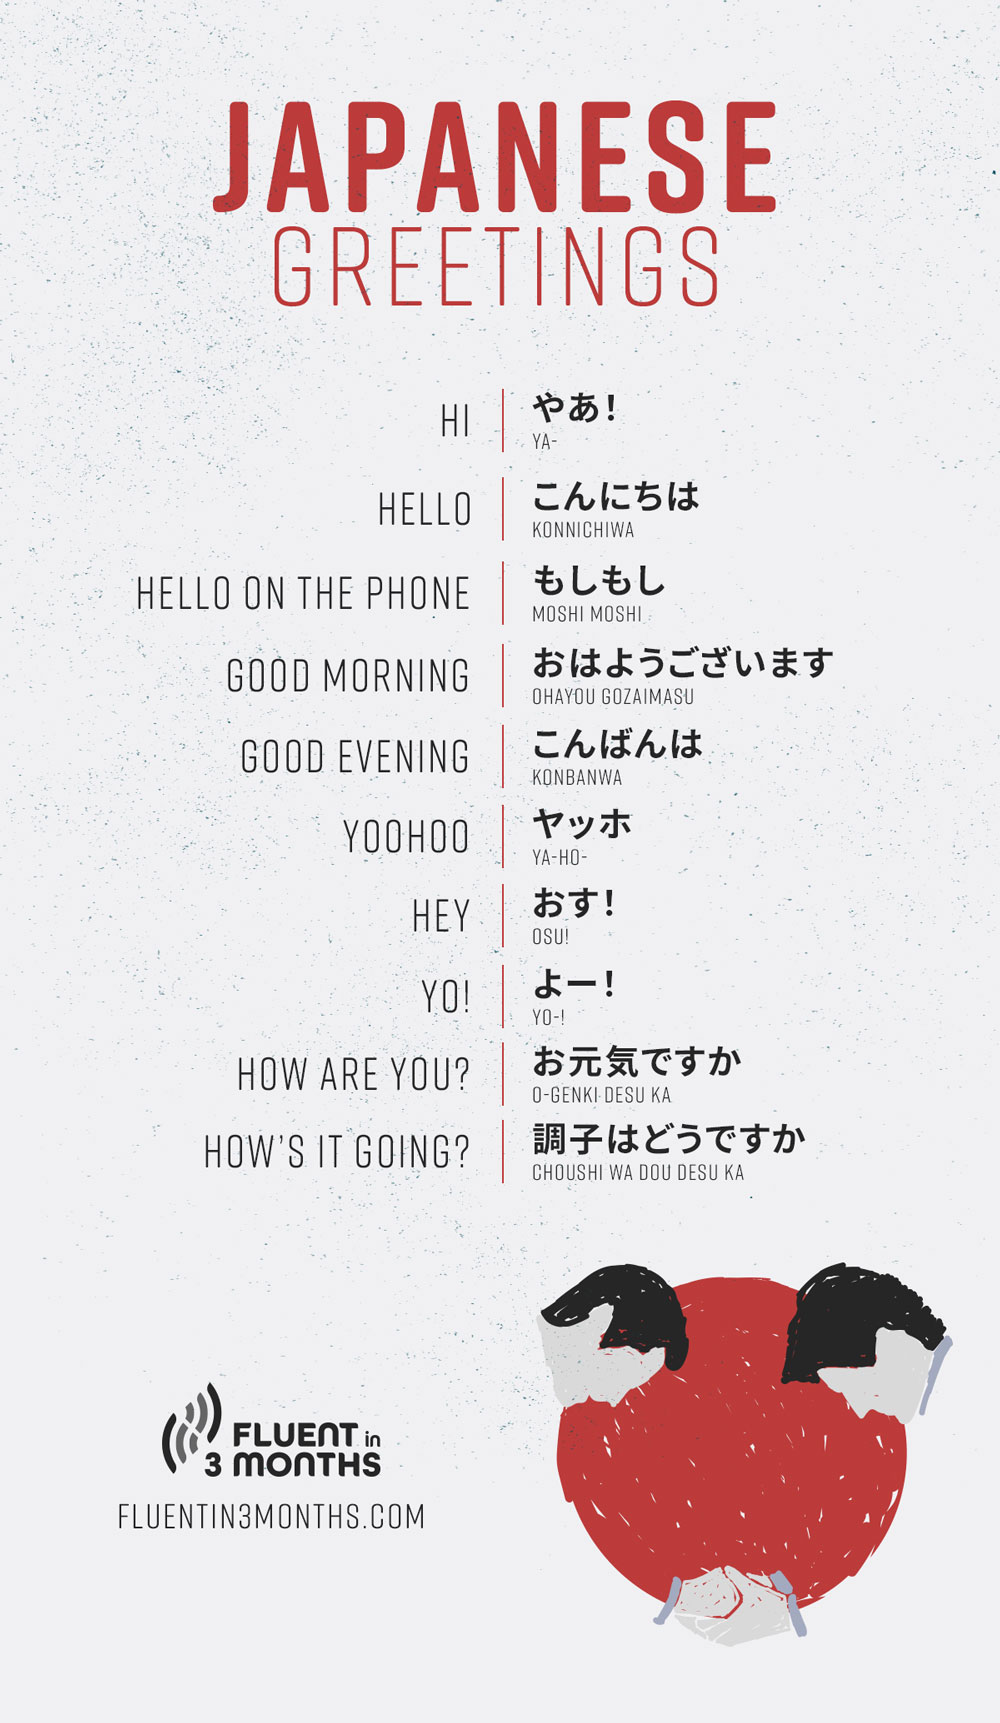 how to write hello in japanese